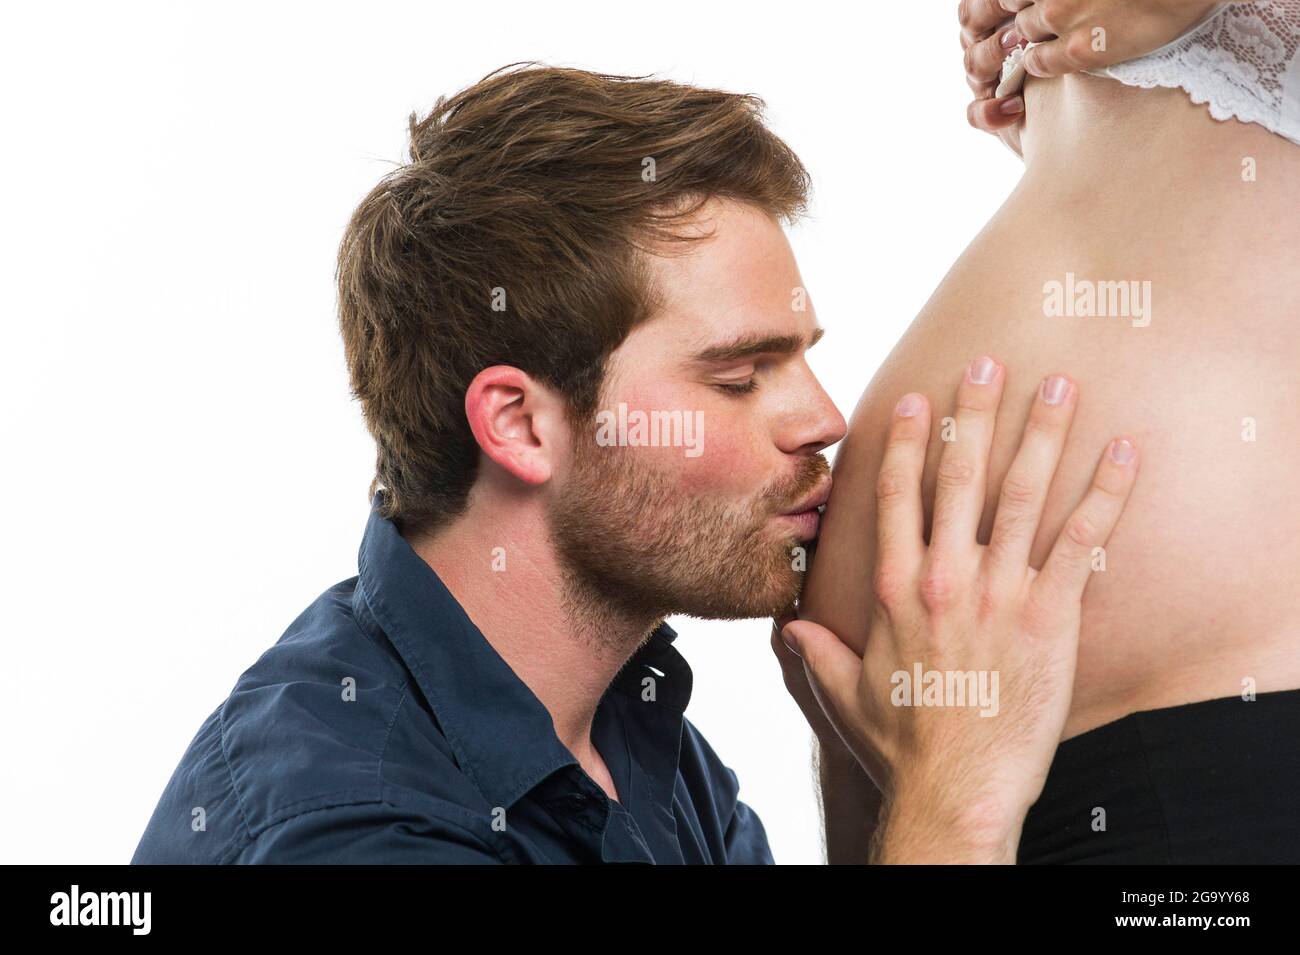 expectant father happily kissing his pregnant wife's baby bump, side view, Germany Stock Photo